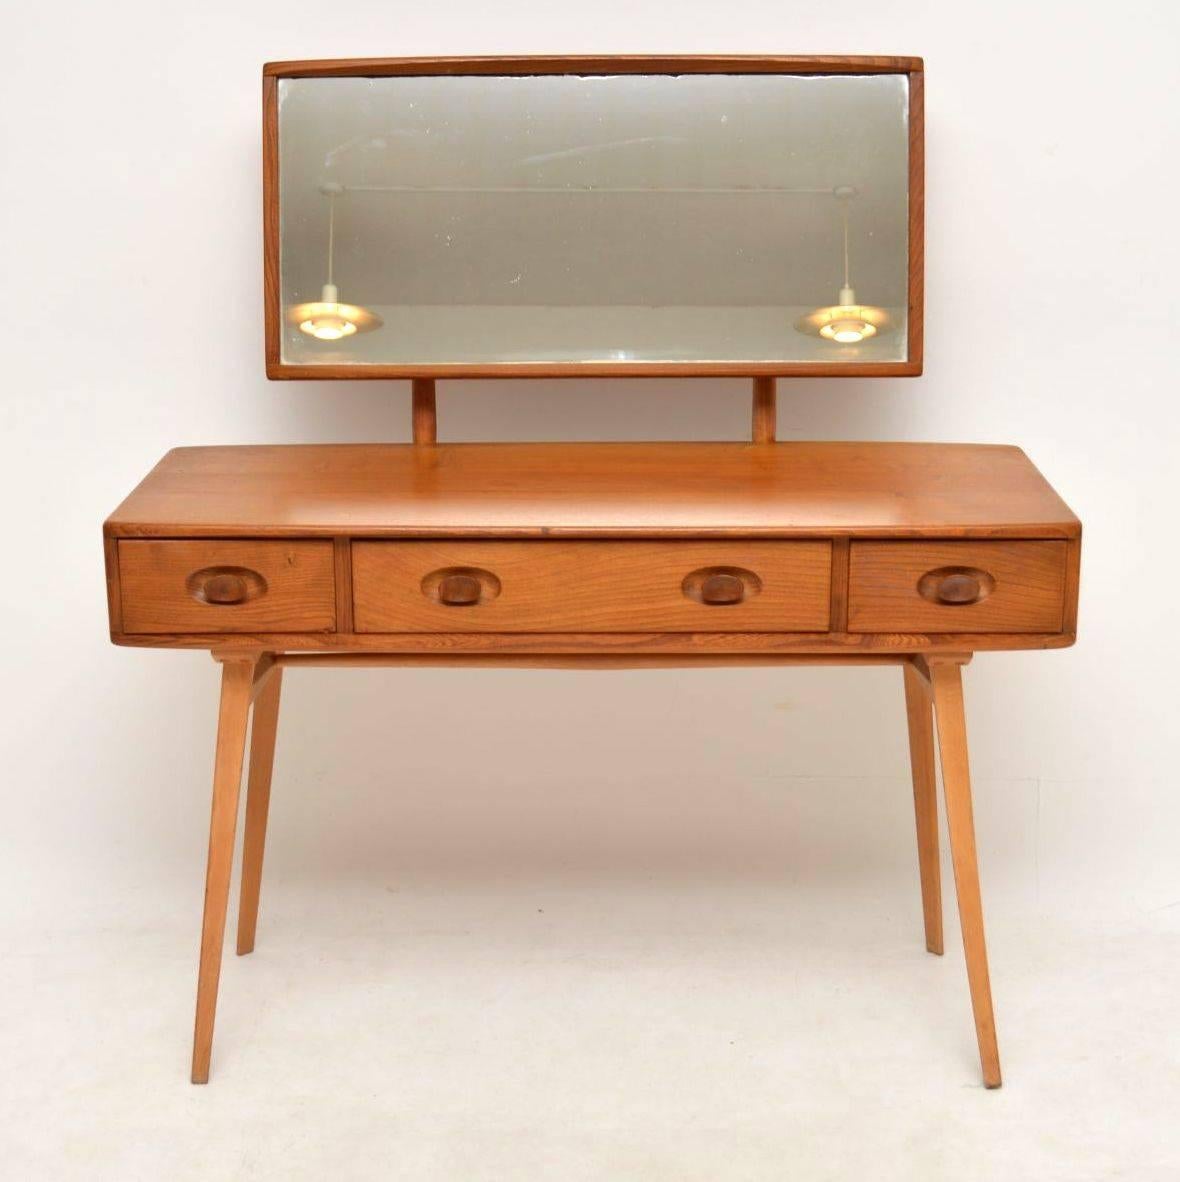 A stunning vintage dressing table by Ercol, this is made from solid elm and is in great original vintage condition, with only some extremely minor wear here and there. This has an adjustable mirror that can be tilted to varying angles or removed if